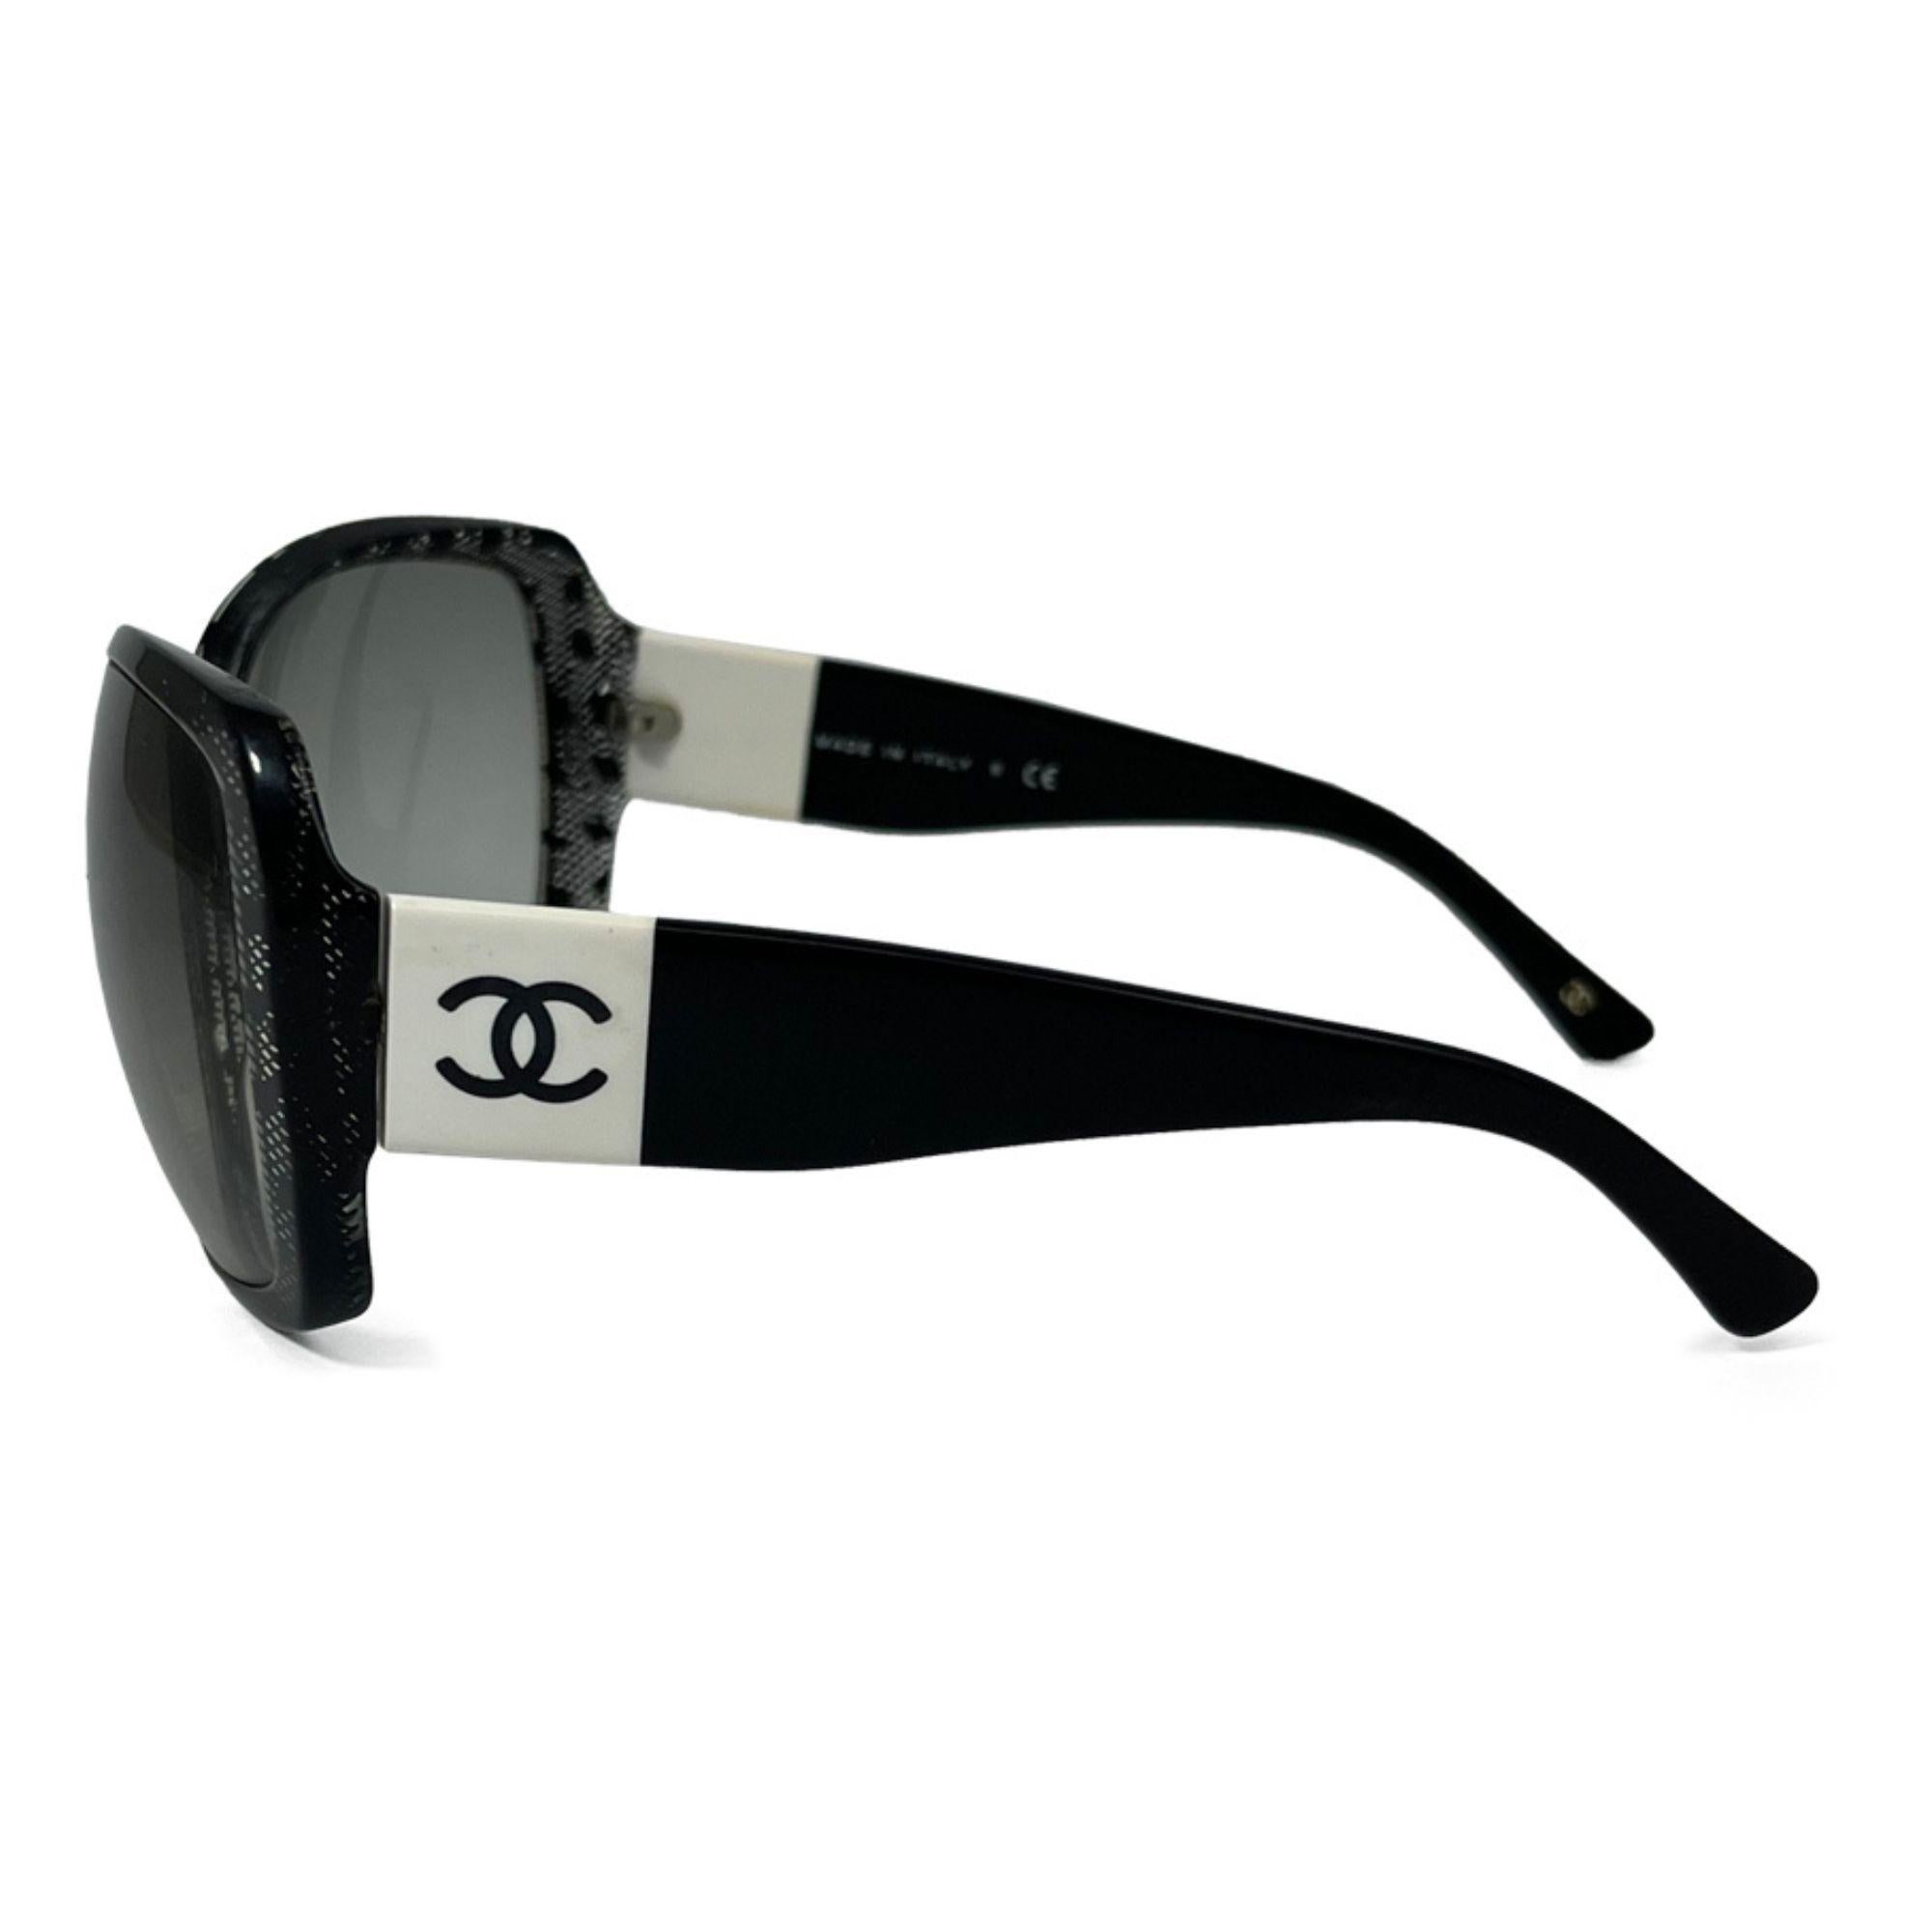 Chanel Lace CC Sunglasses Black 5145. Featuring black frames with large squared rims and lenses with a gradient gray. The arms are a medium width with a white band and a black Chanel CC logo.

Hardware: Acetate
Lens: Black
Size: 125/61/16
Lens